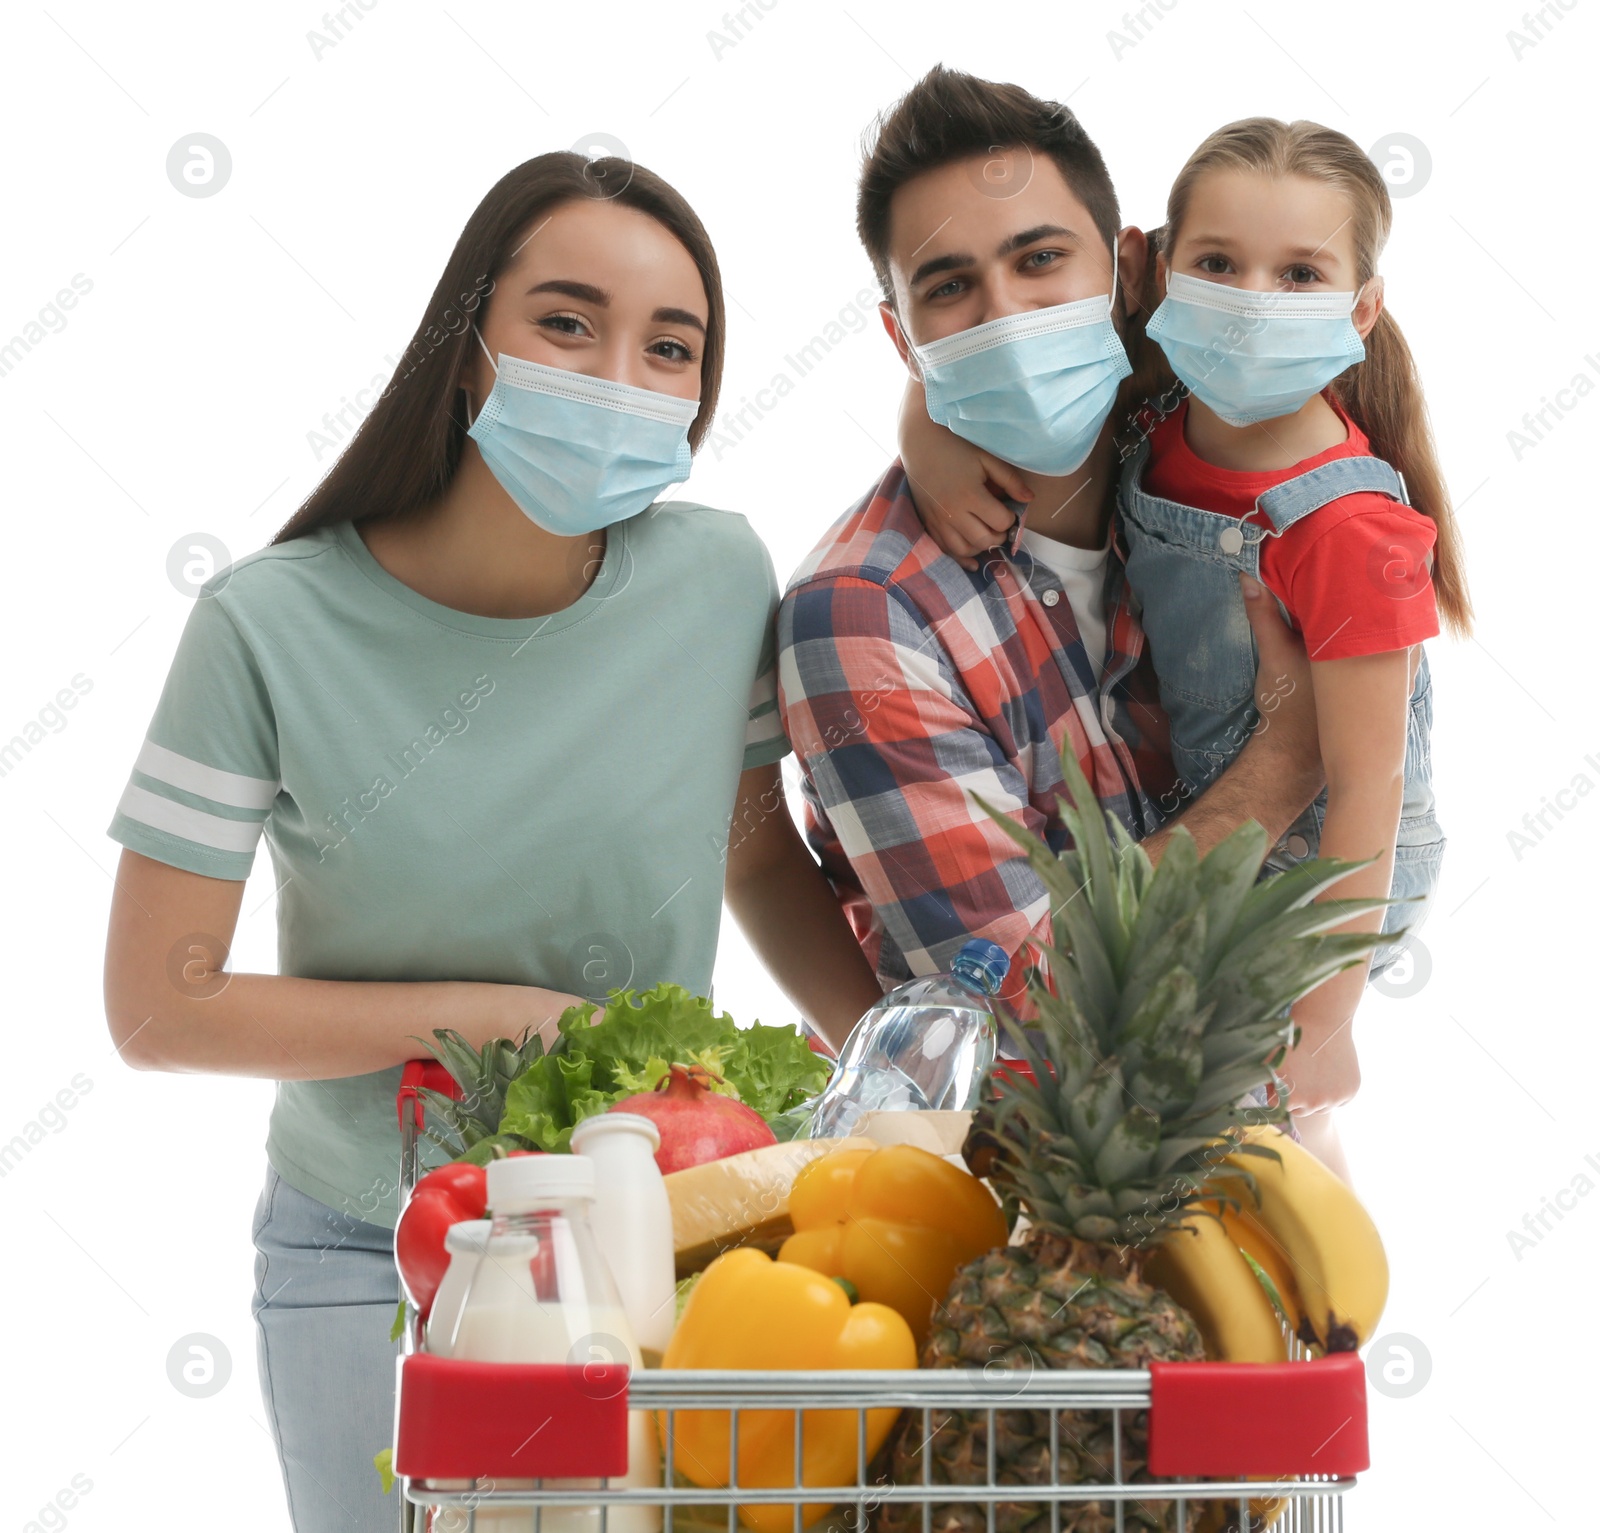 Photo of Family in medical masks with shopping cart full of groceries on white background